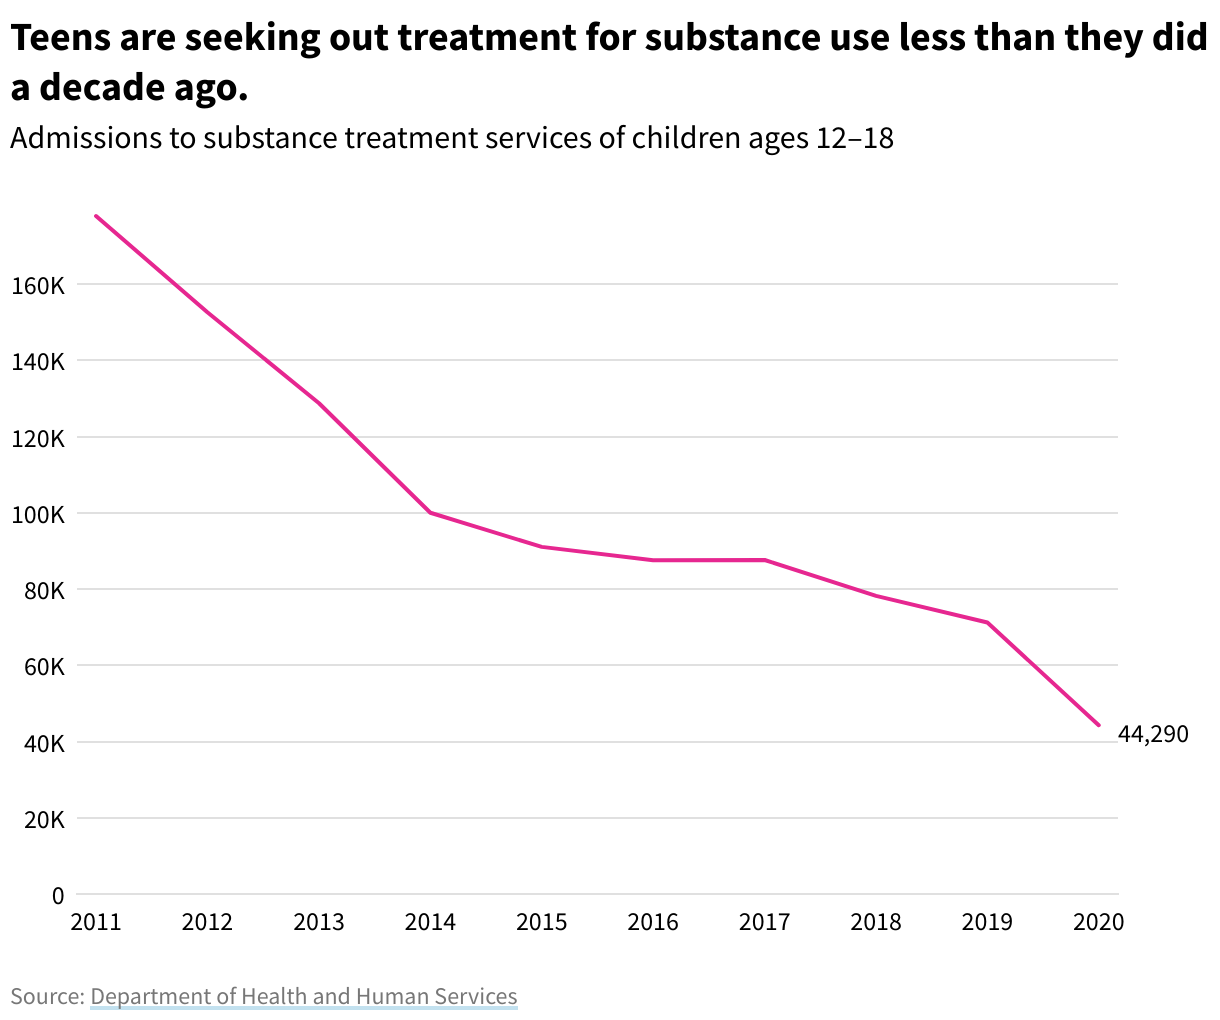 Line chart showing total admissions to substance abuse treatment centers for children ages 12 to 18, with a general downward trend. 